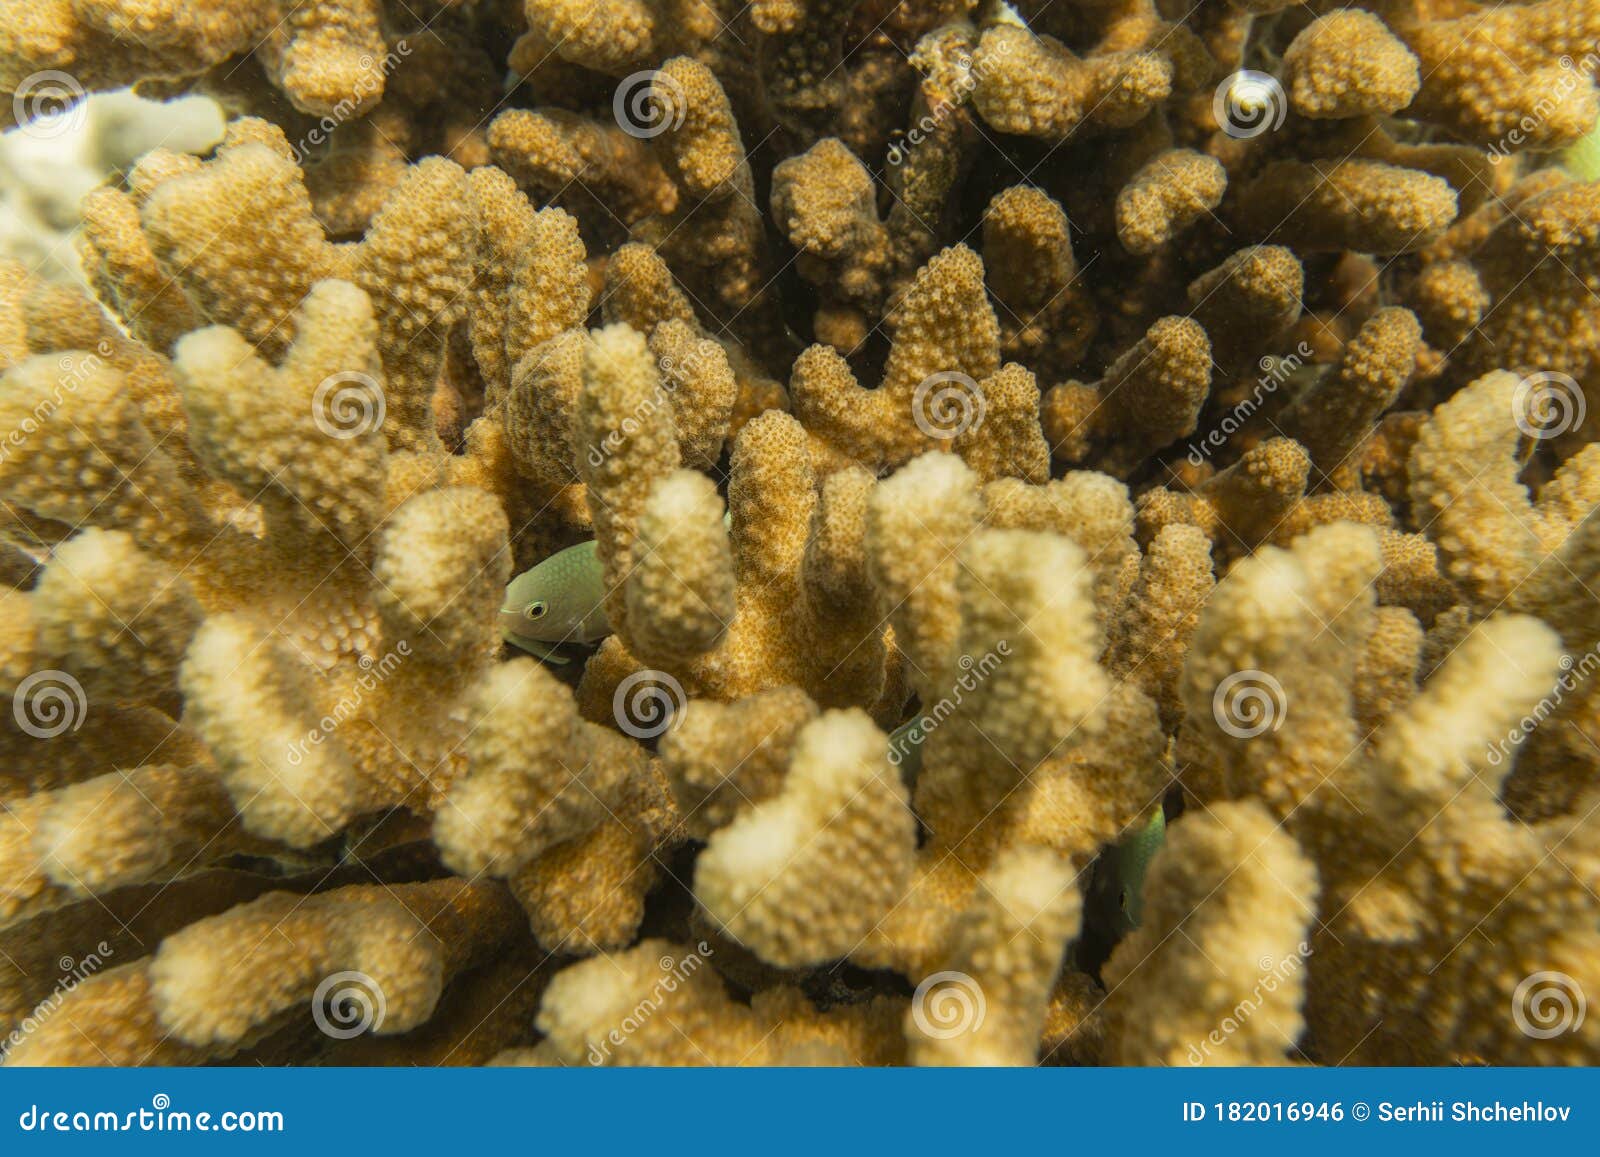 Coral reef underwater view stock photo. Image of contamination - 182016946